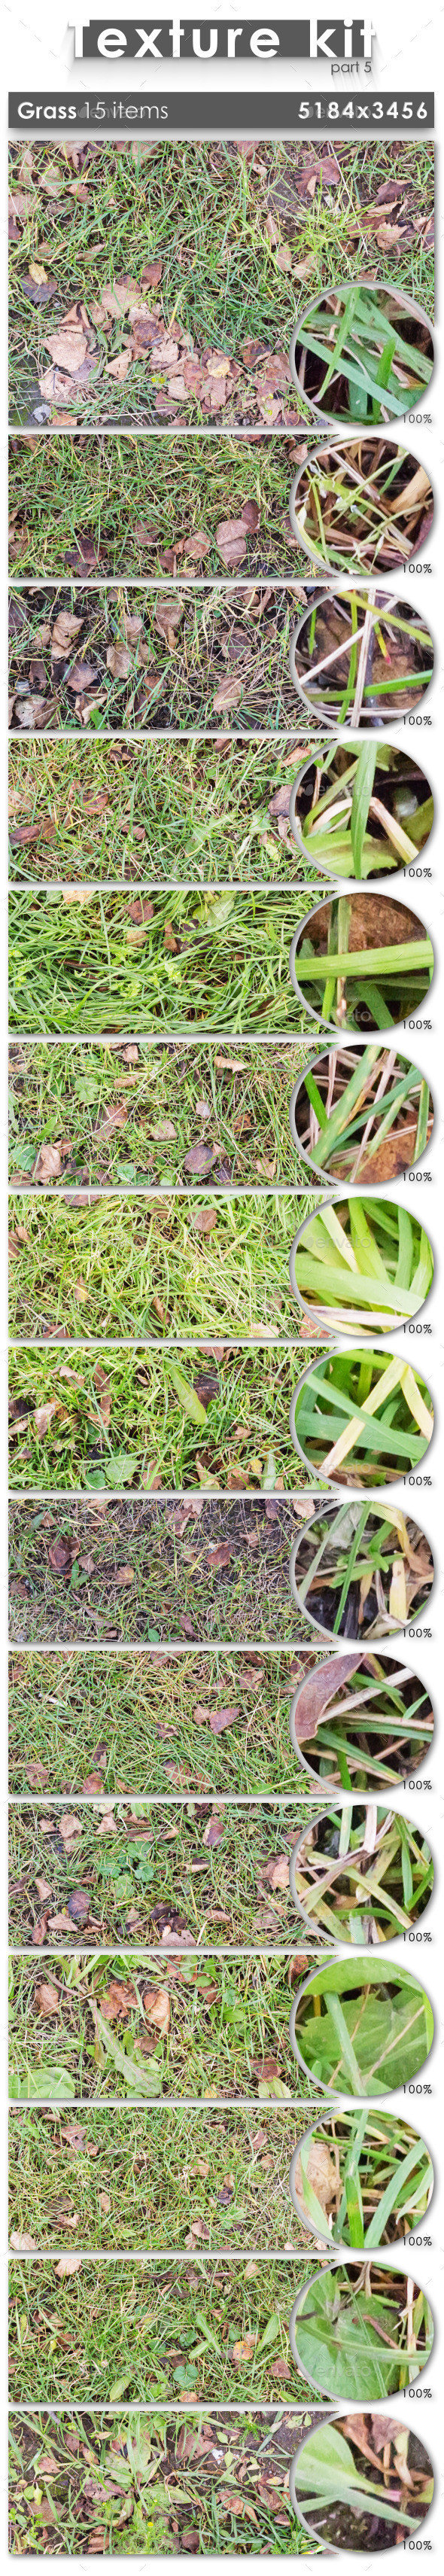 Texture 20kit 205 20  20grass preview new